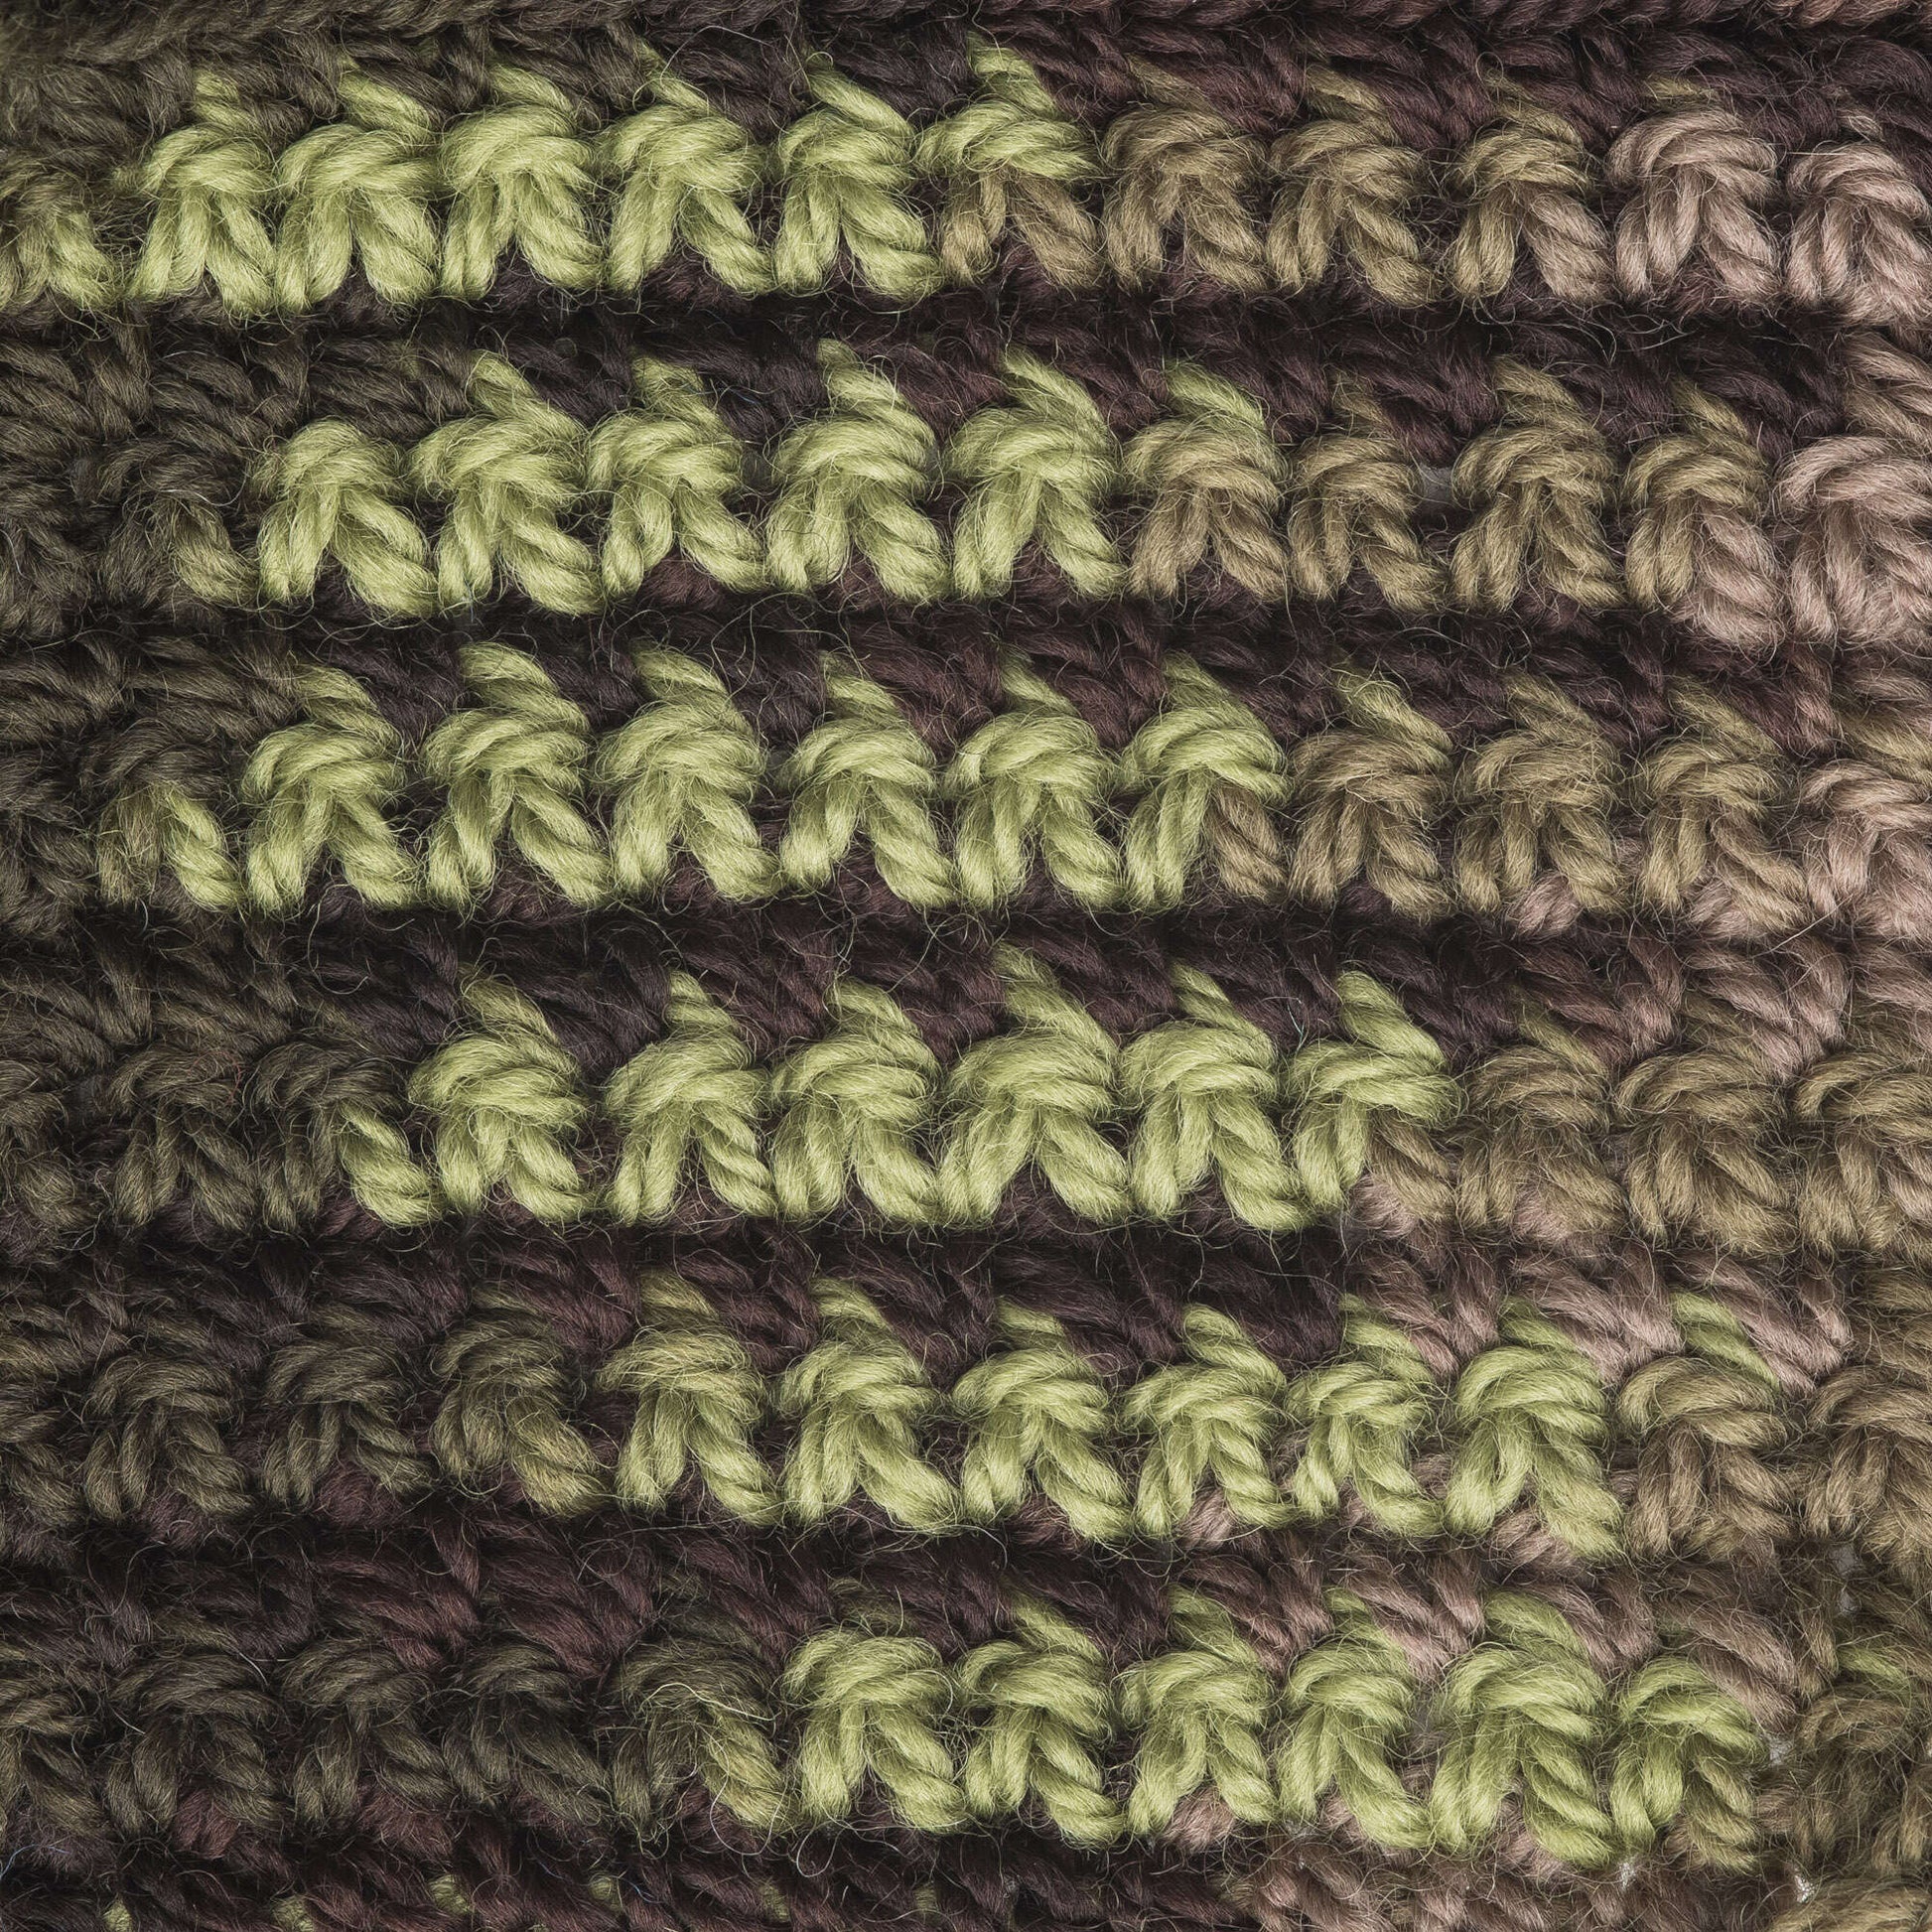 Patons Classic Wool Worsted Yarn - Discontinued Shades Forest